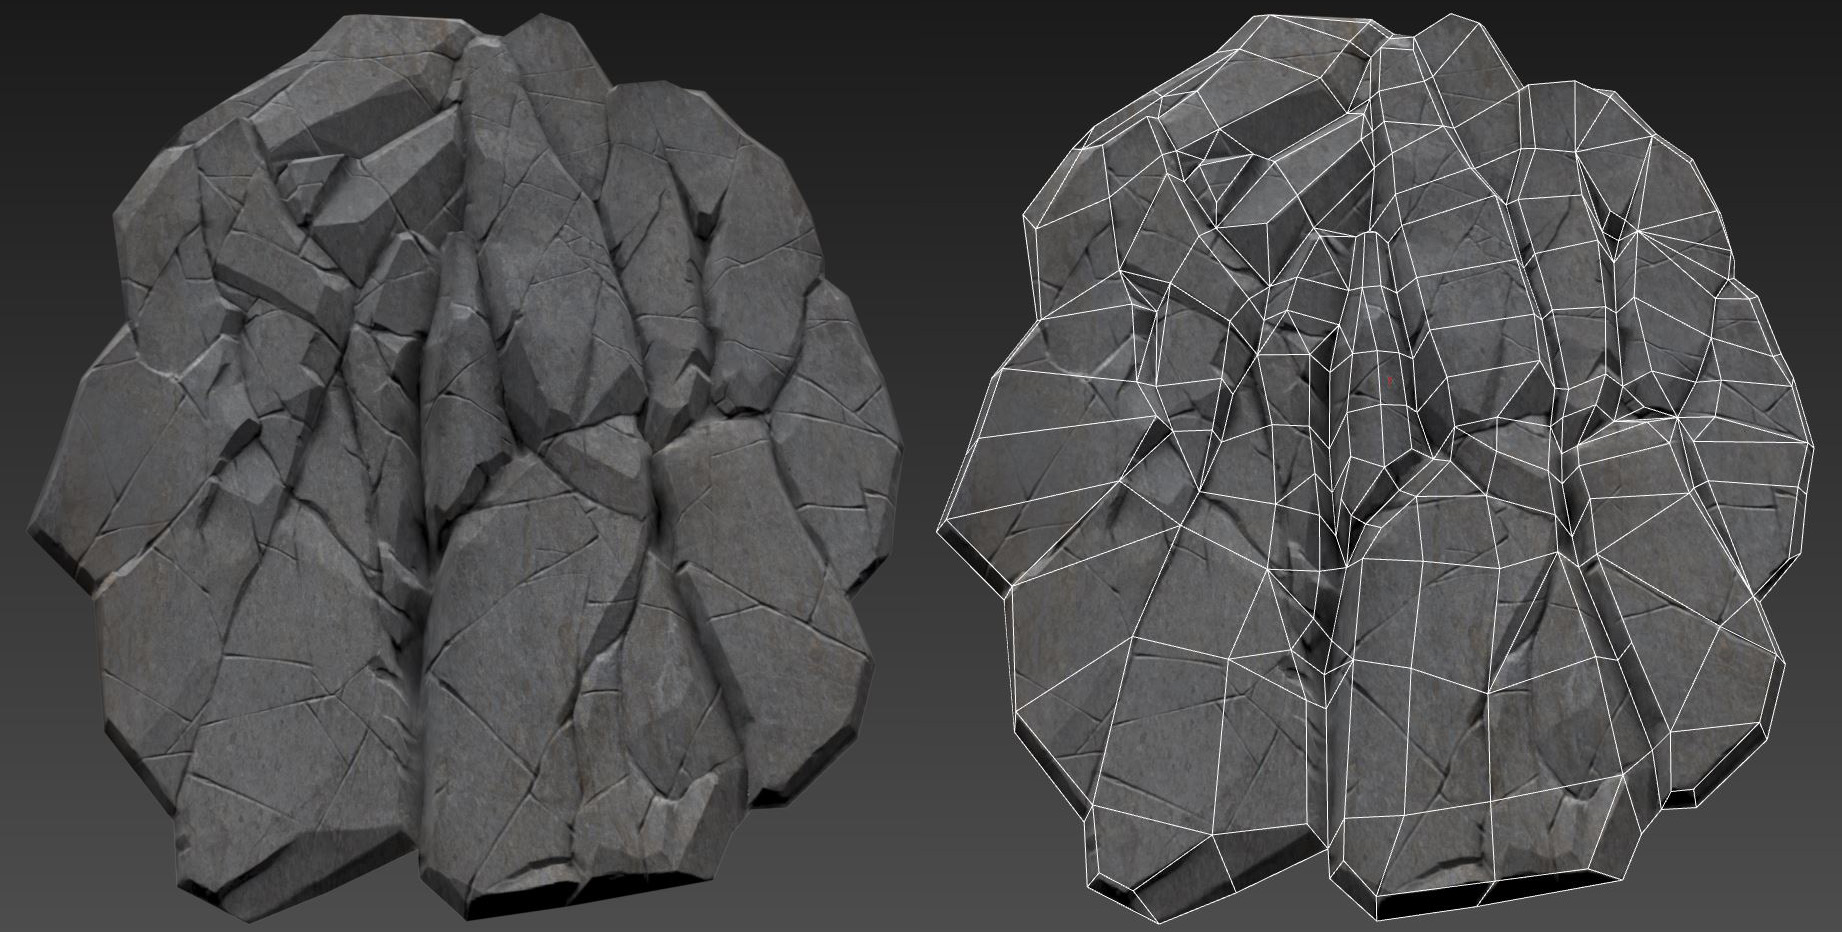  A rock asset that was used many places in The Unmaking. Zbrush -&gt; Topogun -&gt; Maya. 